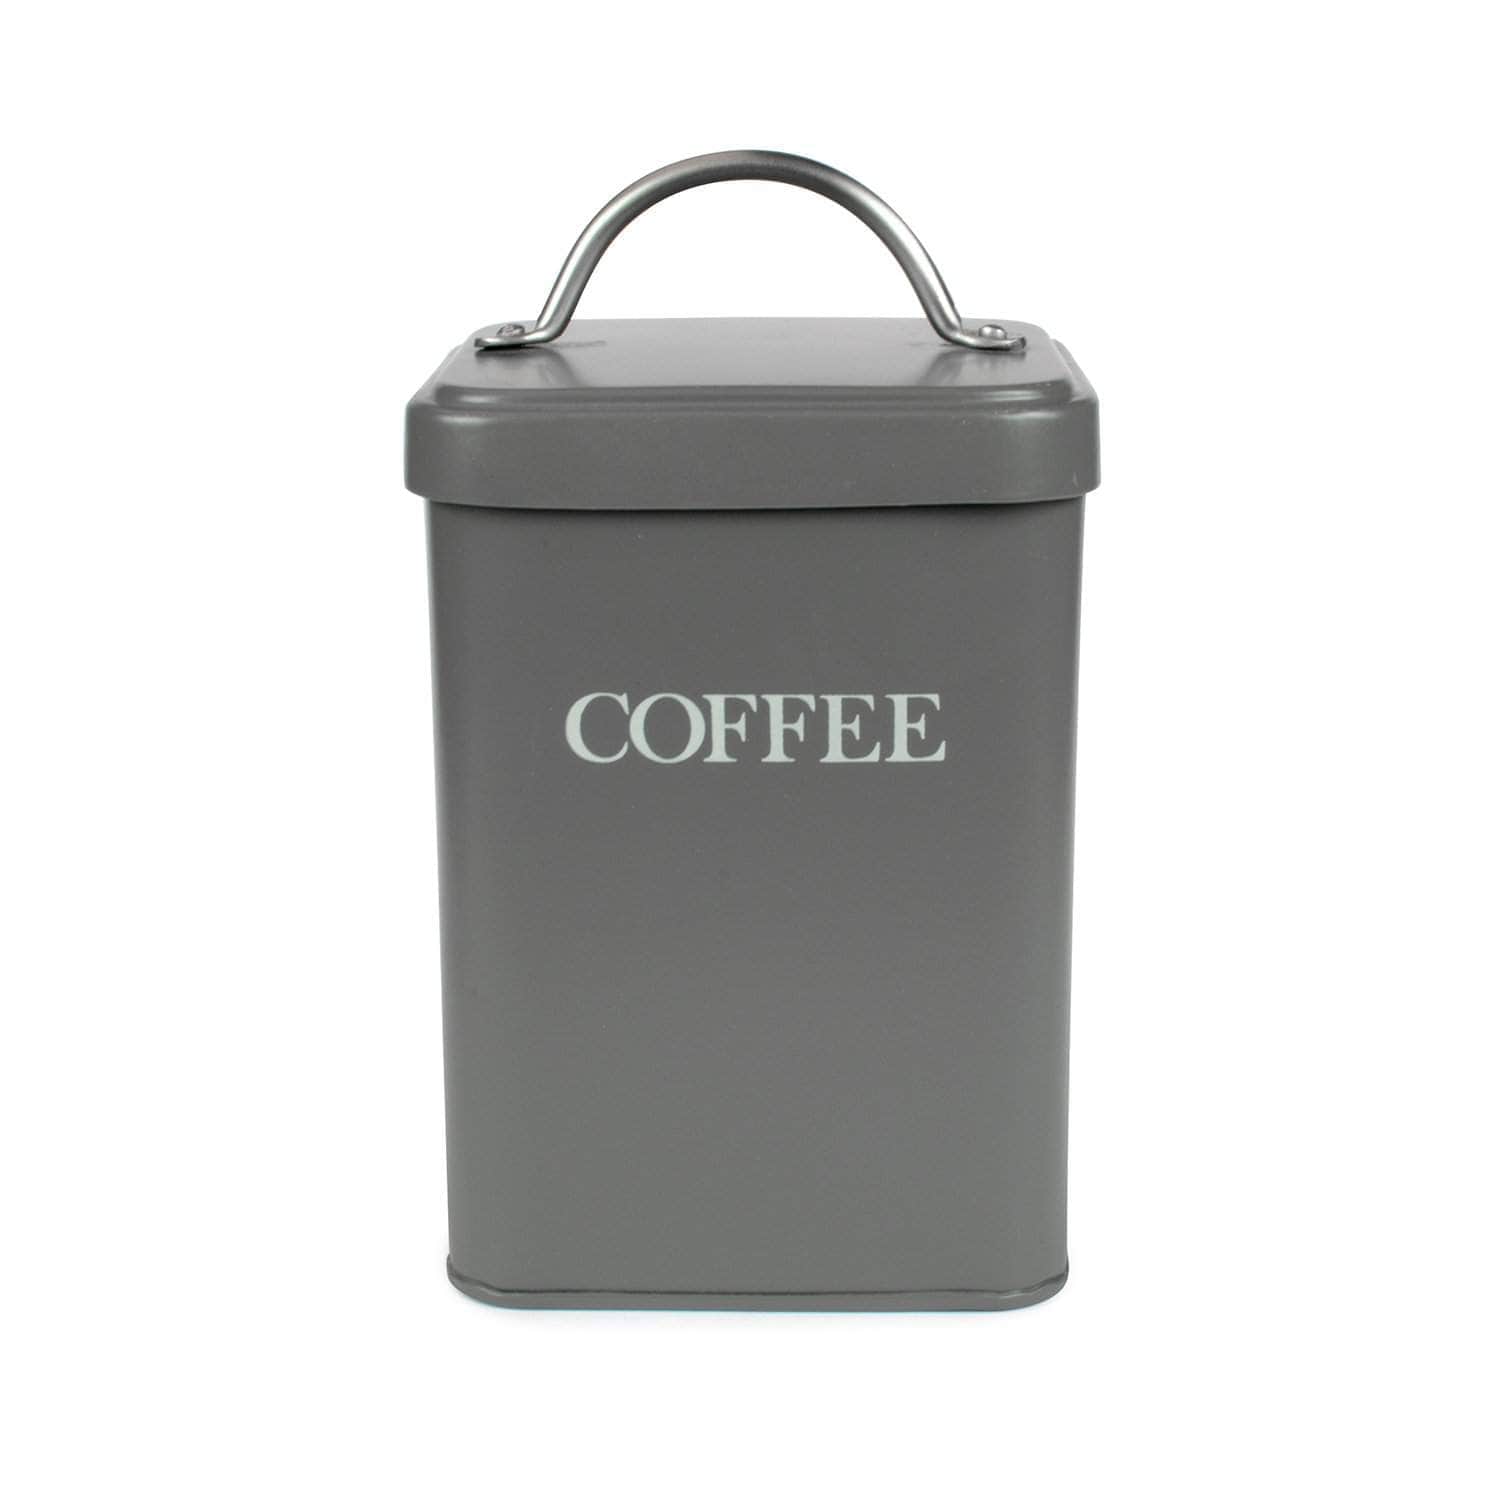 *Not Quite Perfect* Coffee canister in charcoal